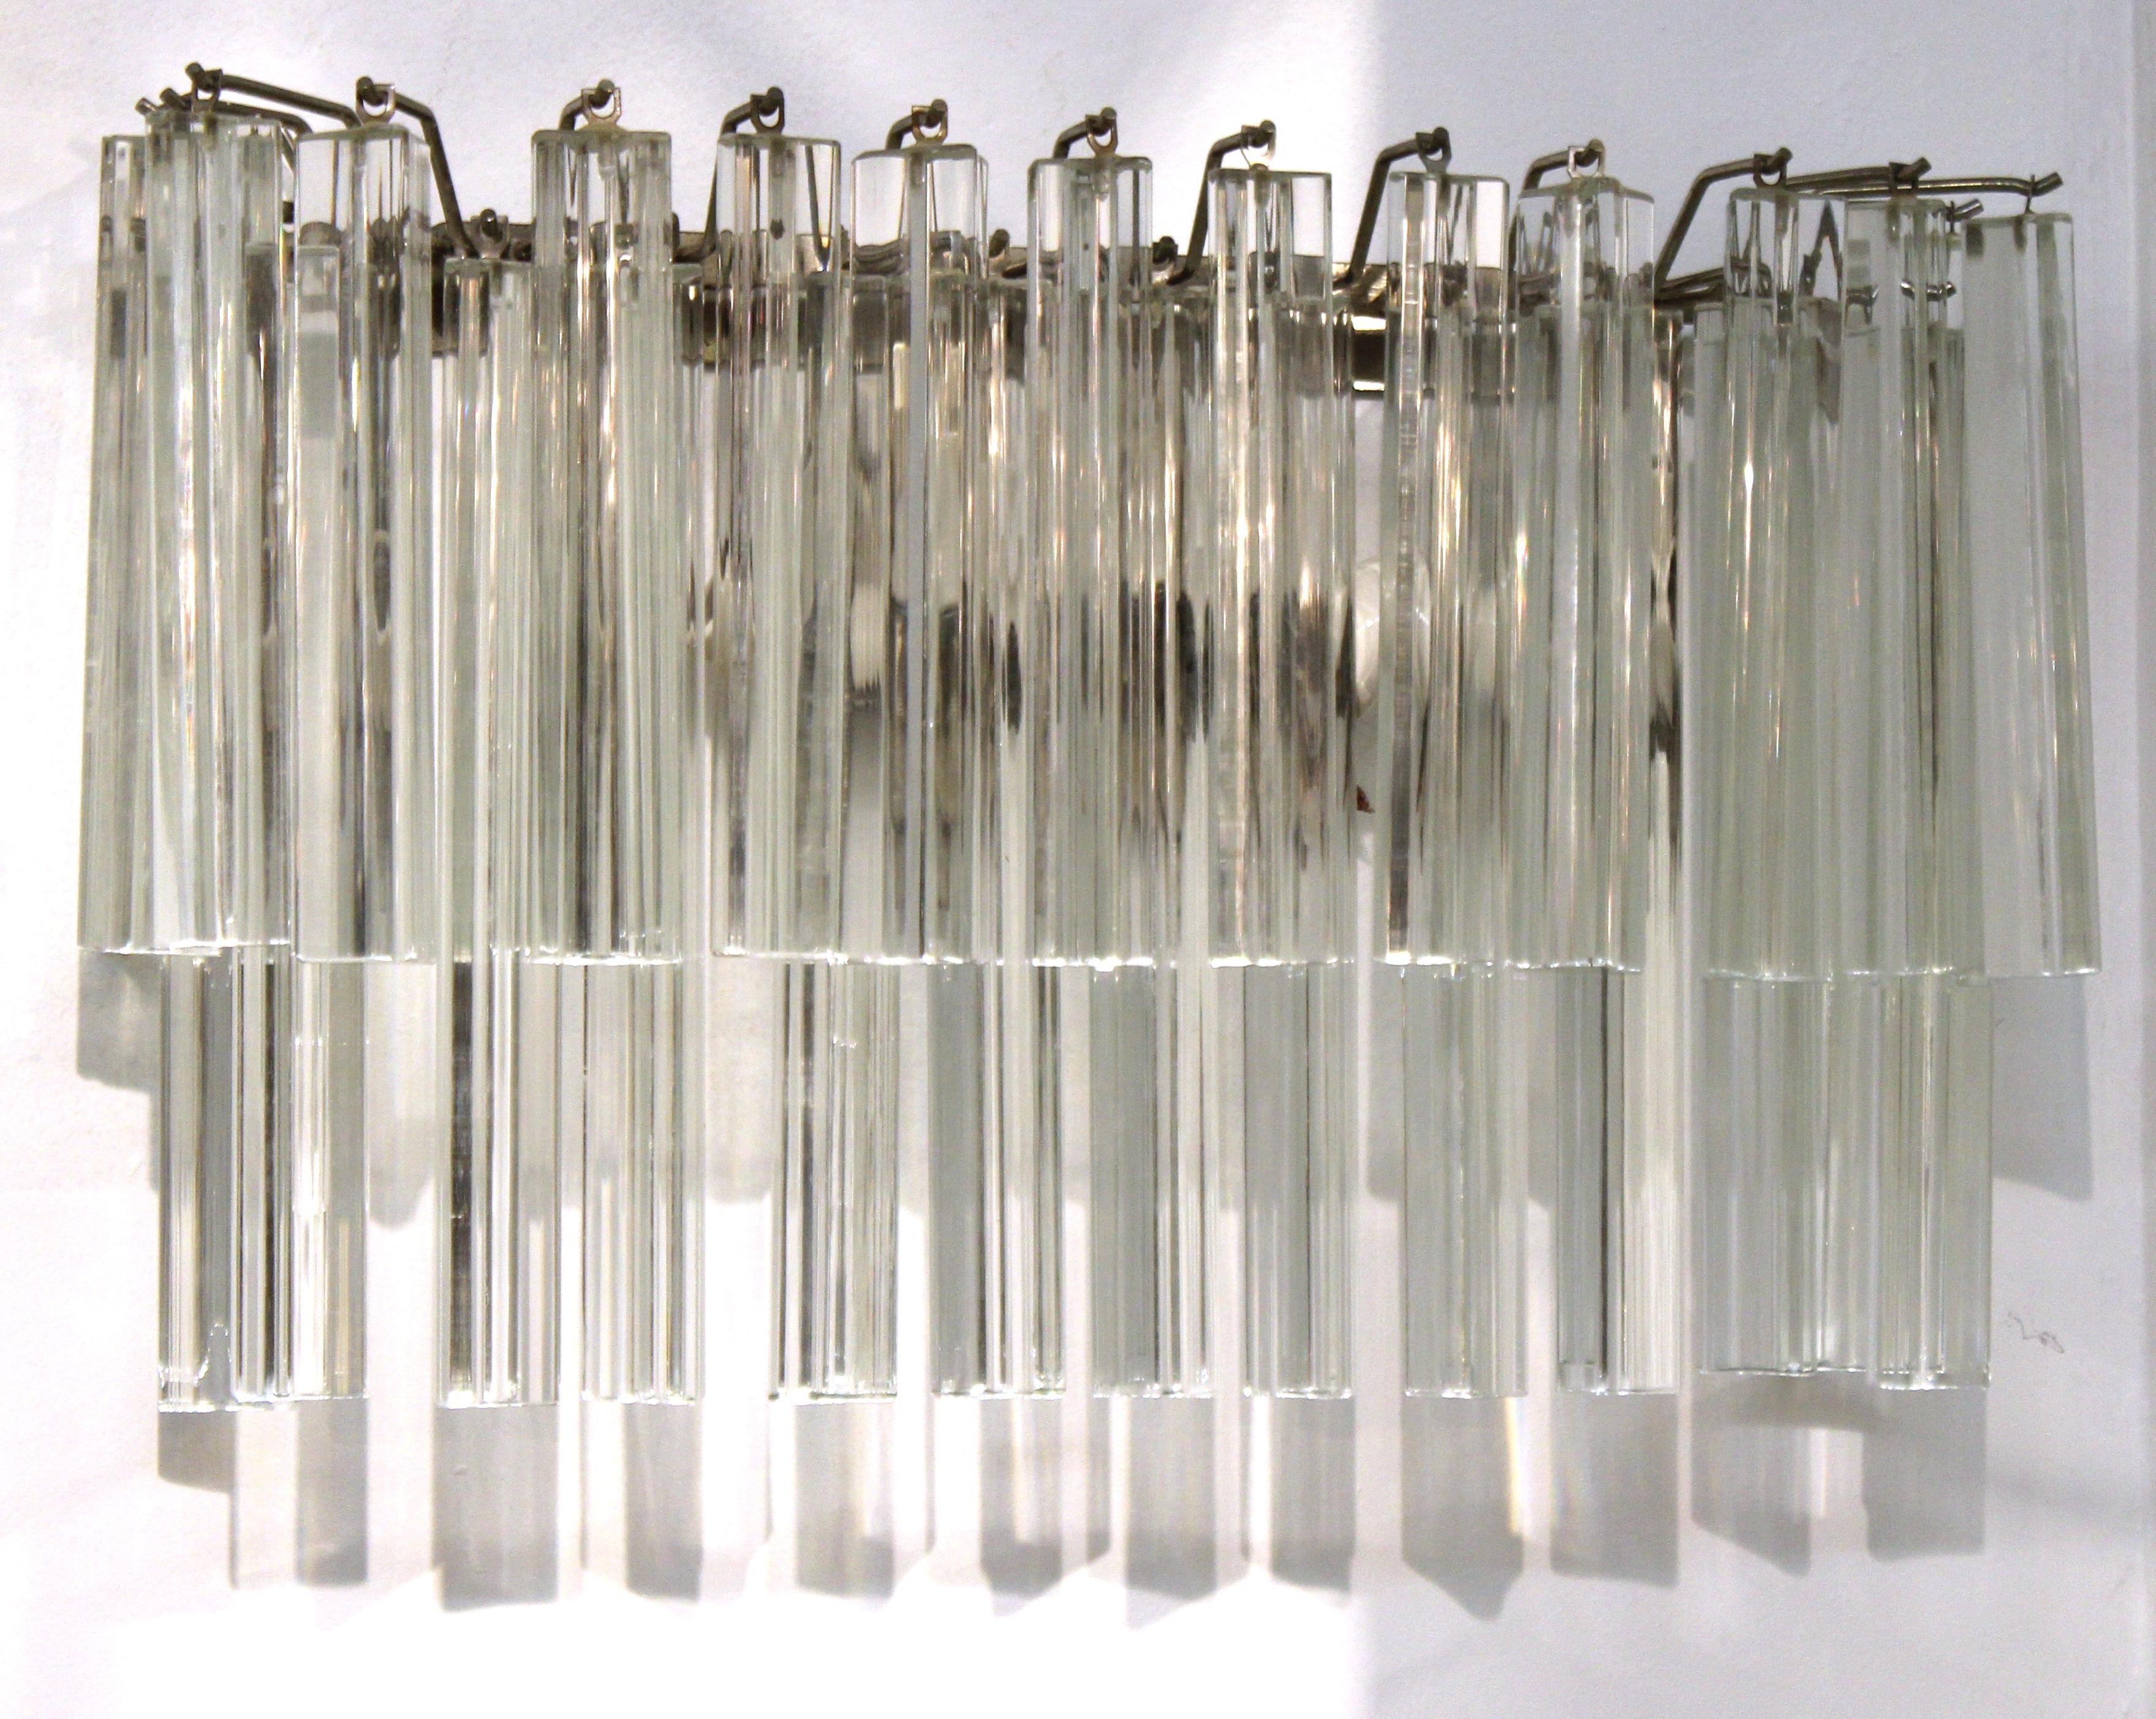 Italian modern sconces by Venini, each one with two tiers of hanging glass prisms on a metal frame. The pair is in great vintage condition with age-appropriate wear.